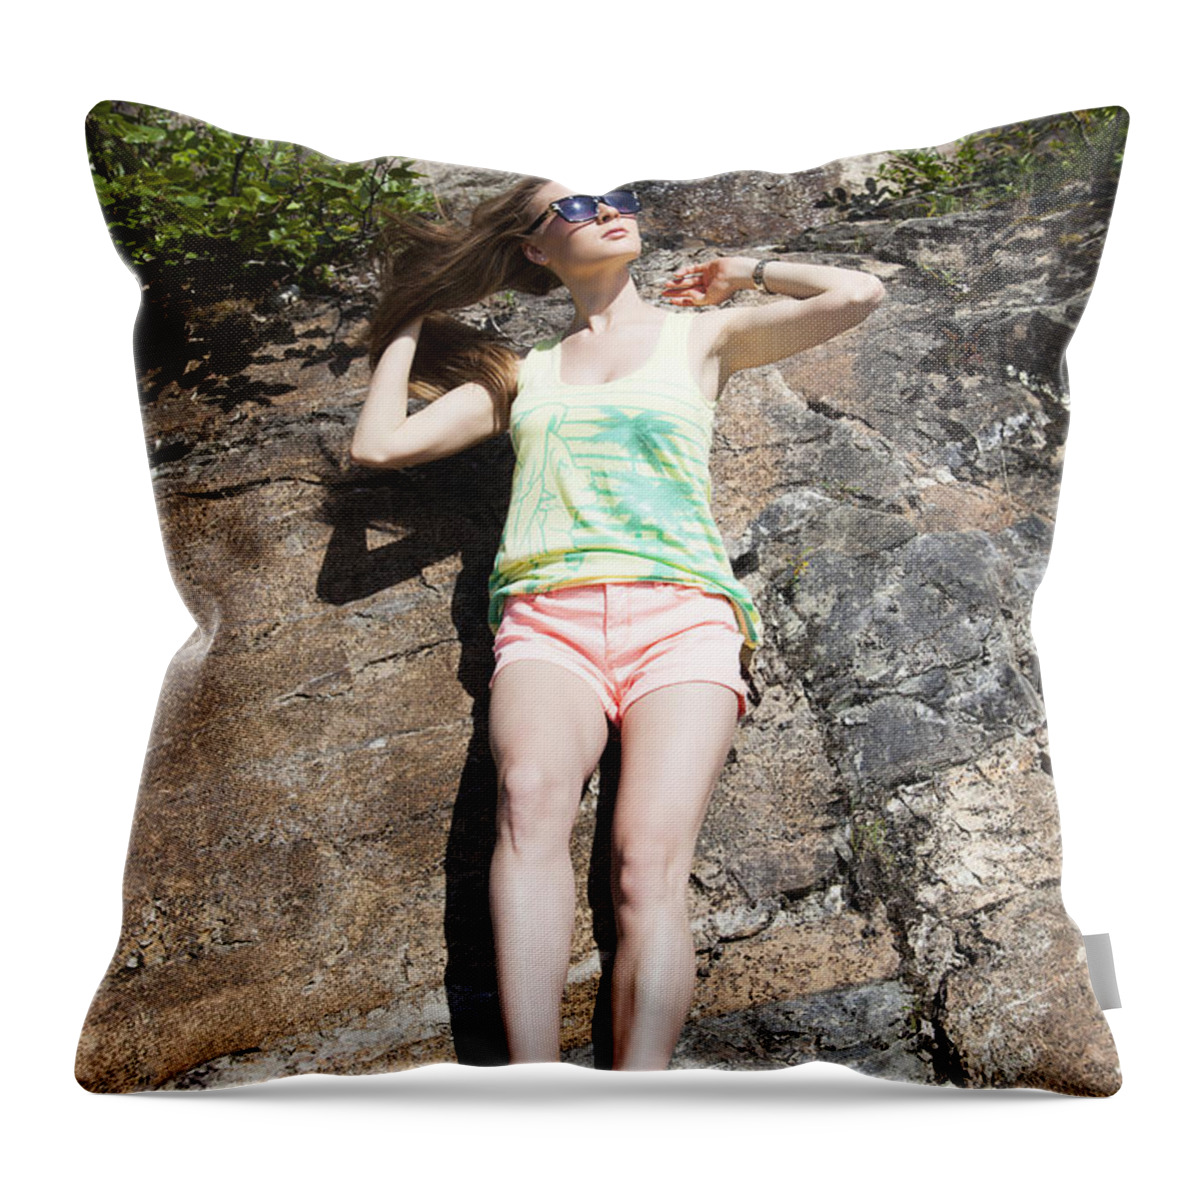 Girl Throw Pillow featuring the photograph Hanging On The Rock by Ramunas Bruzas